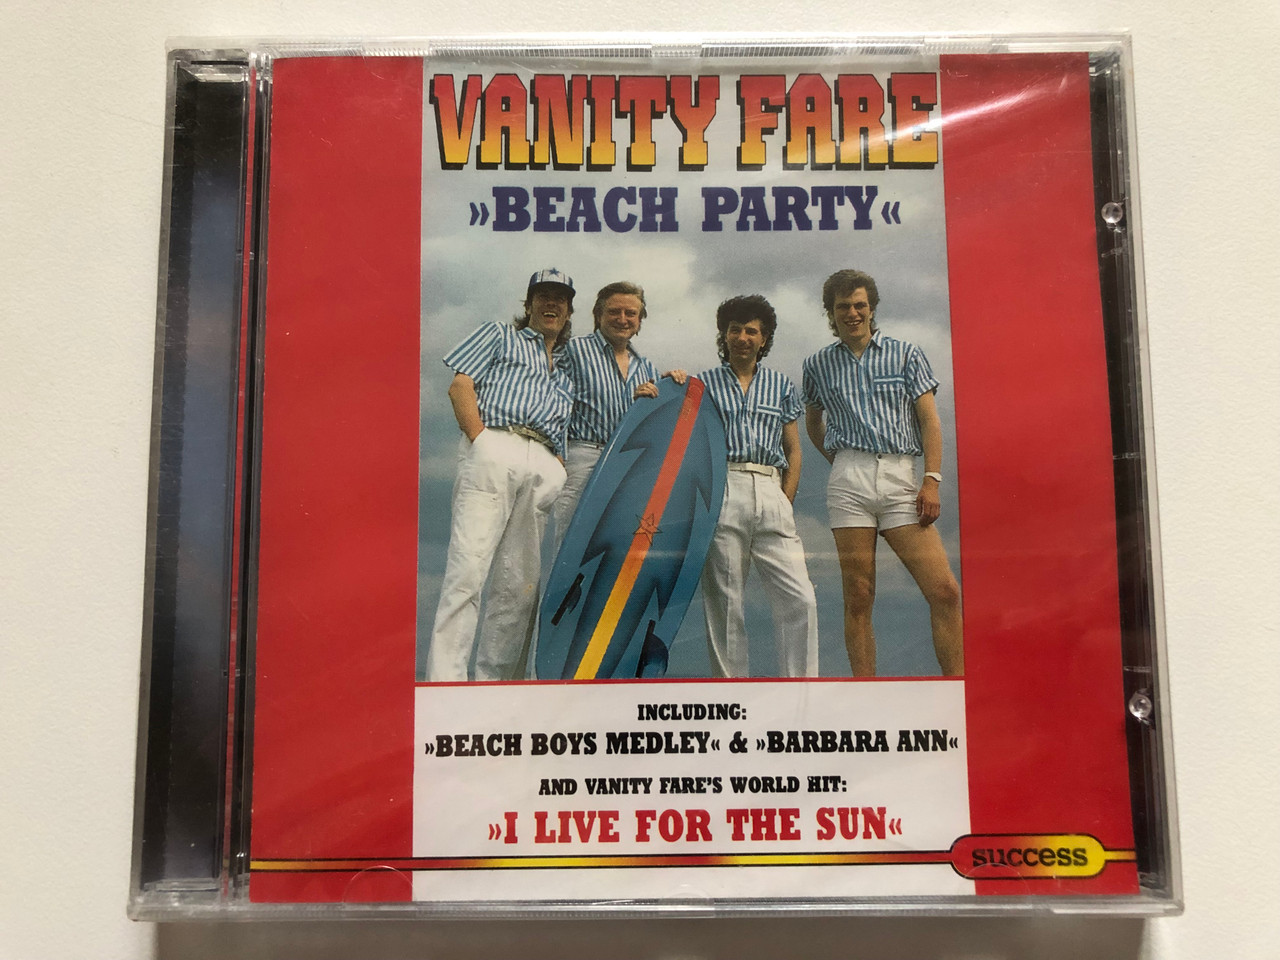 https://cdn10.bigcommerce.com/s-62bdpkt7pb/products/0/images/311363/Vanity_Fare_Beach_Party_-_IncludingBeach_Boys_Medley_Barbara_Ann_And_Vanity_Fares_World_Hit_I_Live_For_The_Sun_Success_Audio_CD_1994_16198CD_1__28243.1699623417.1280.1280.JPG?c=2